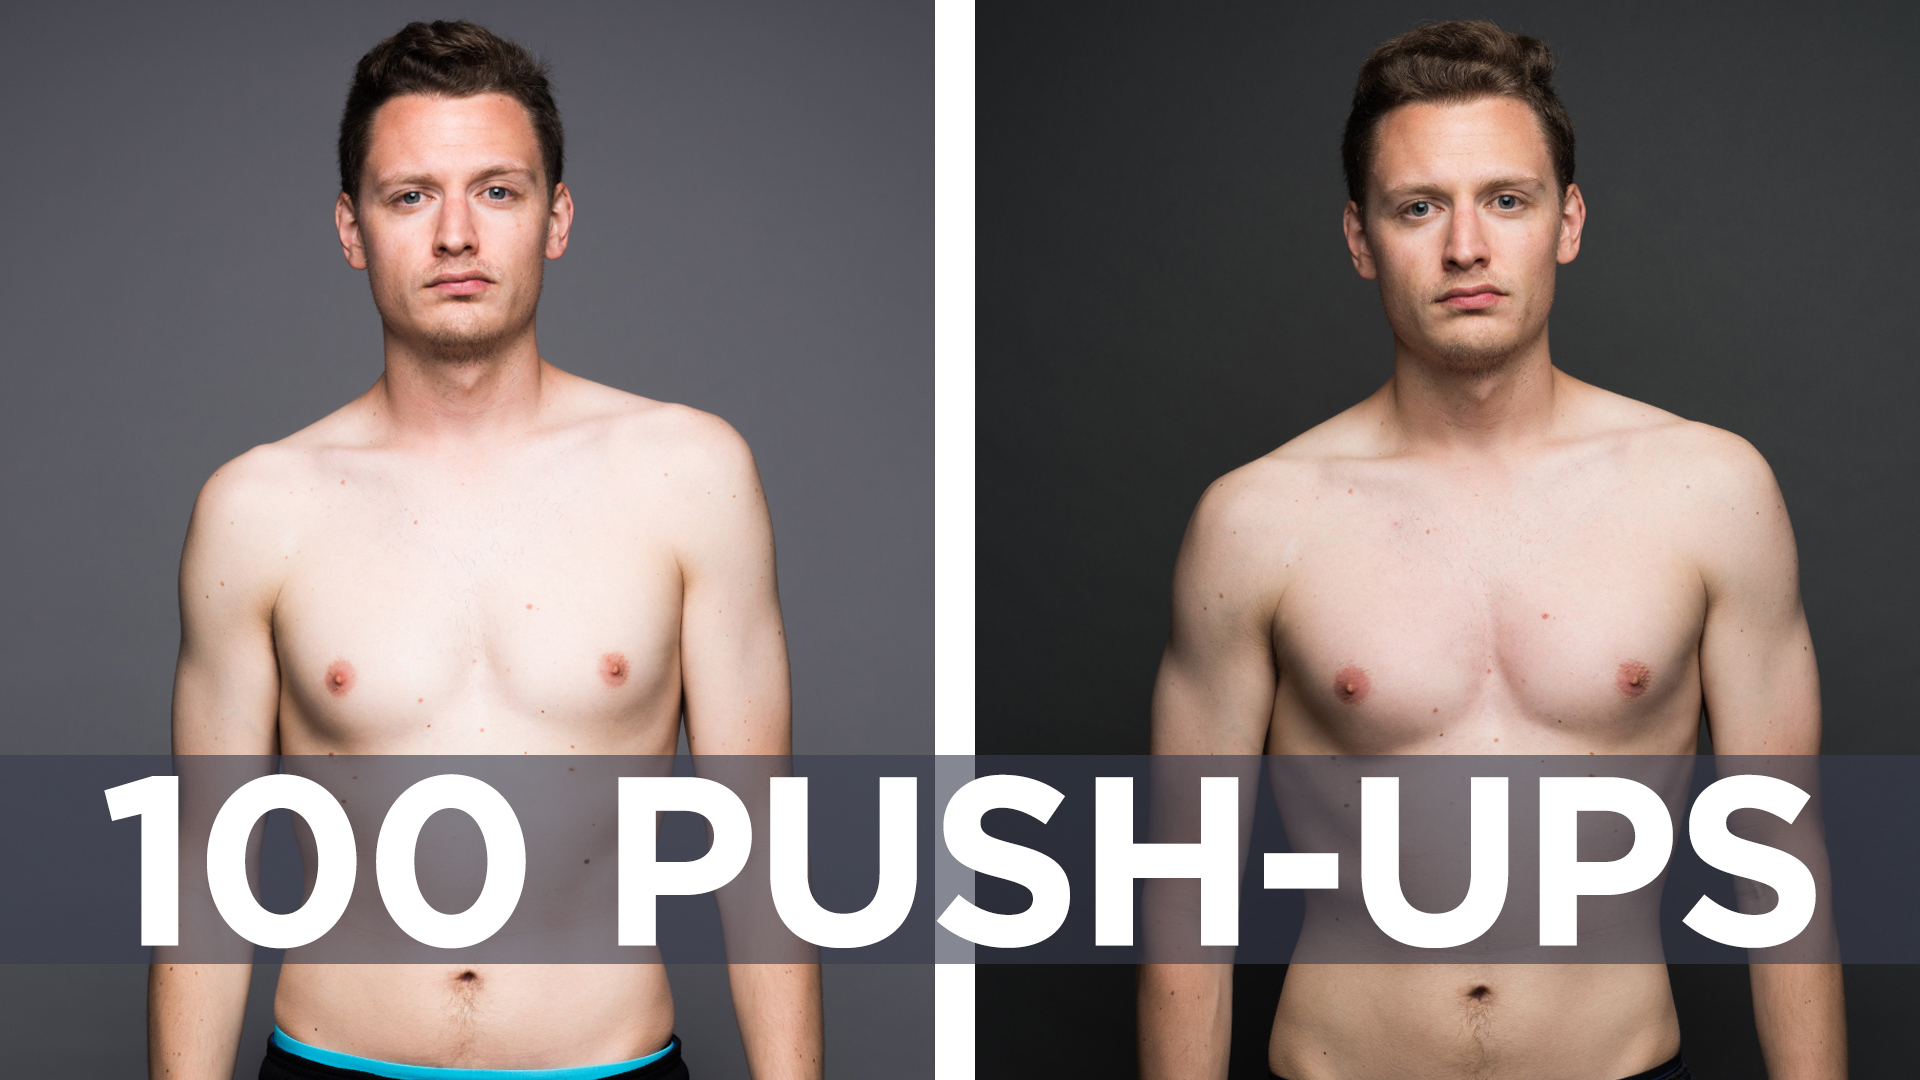 you can do pushups everyday